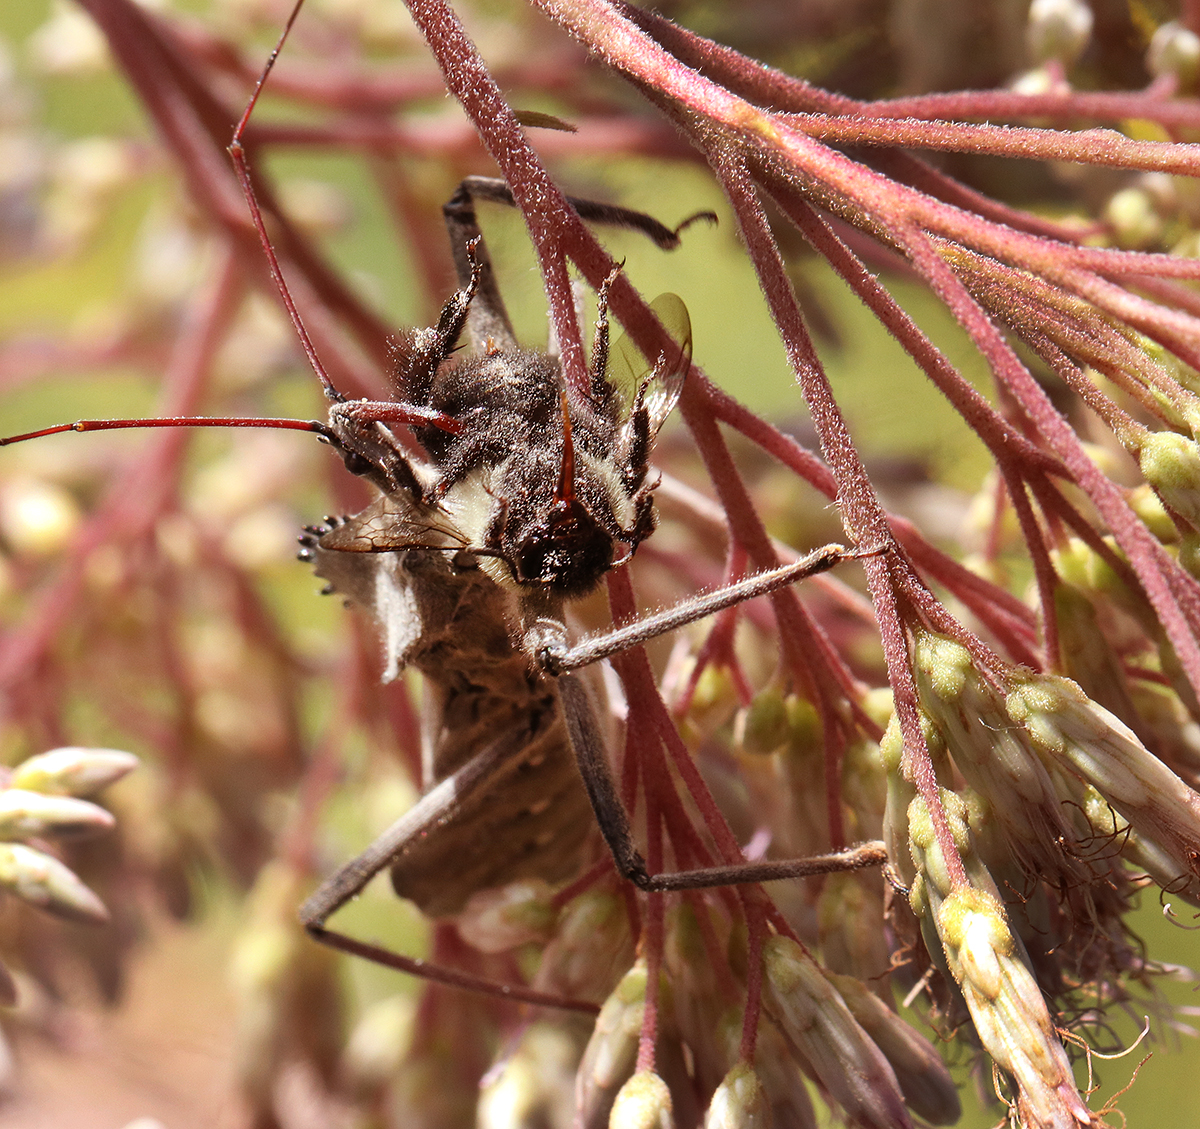 The wheel bugs love hanging out on the joe-pye weed and grabbing unsuspecting pollinators like this hapless bumble bee.